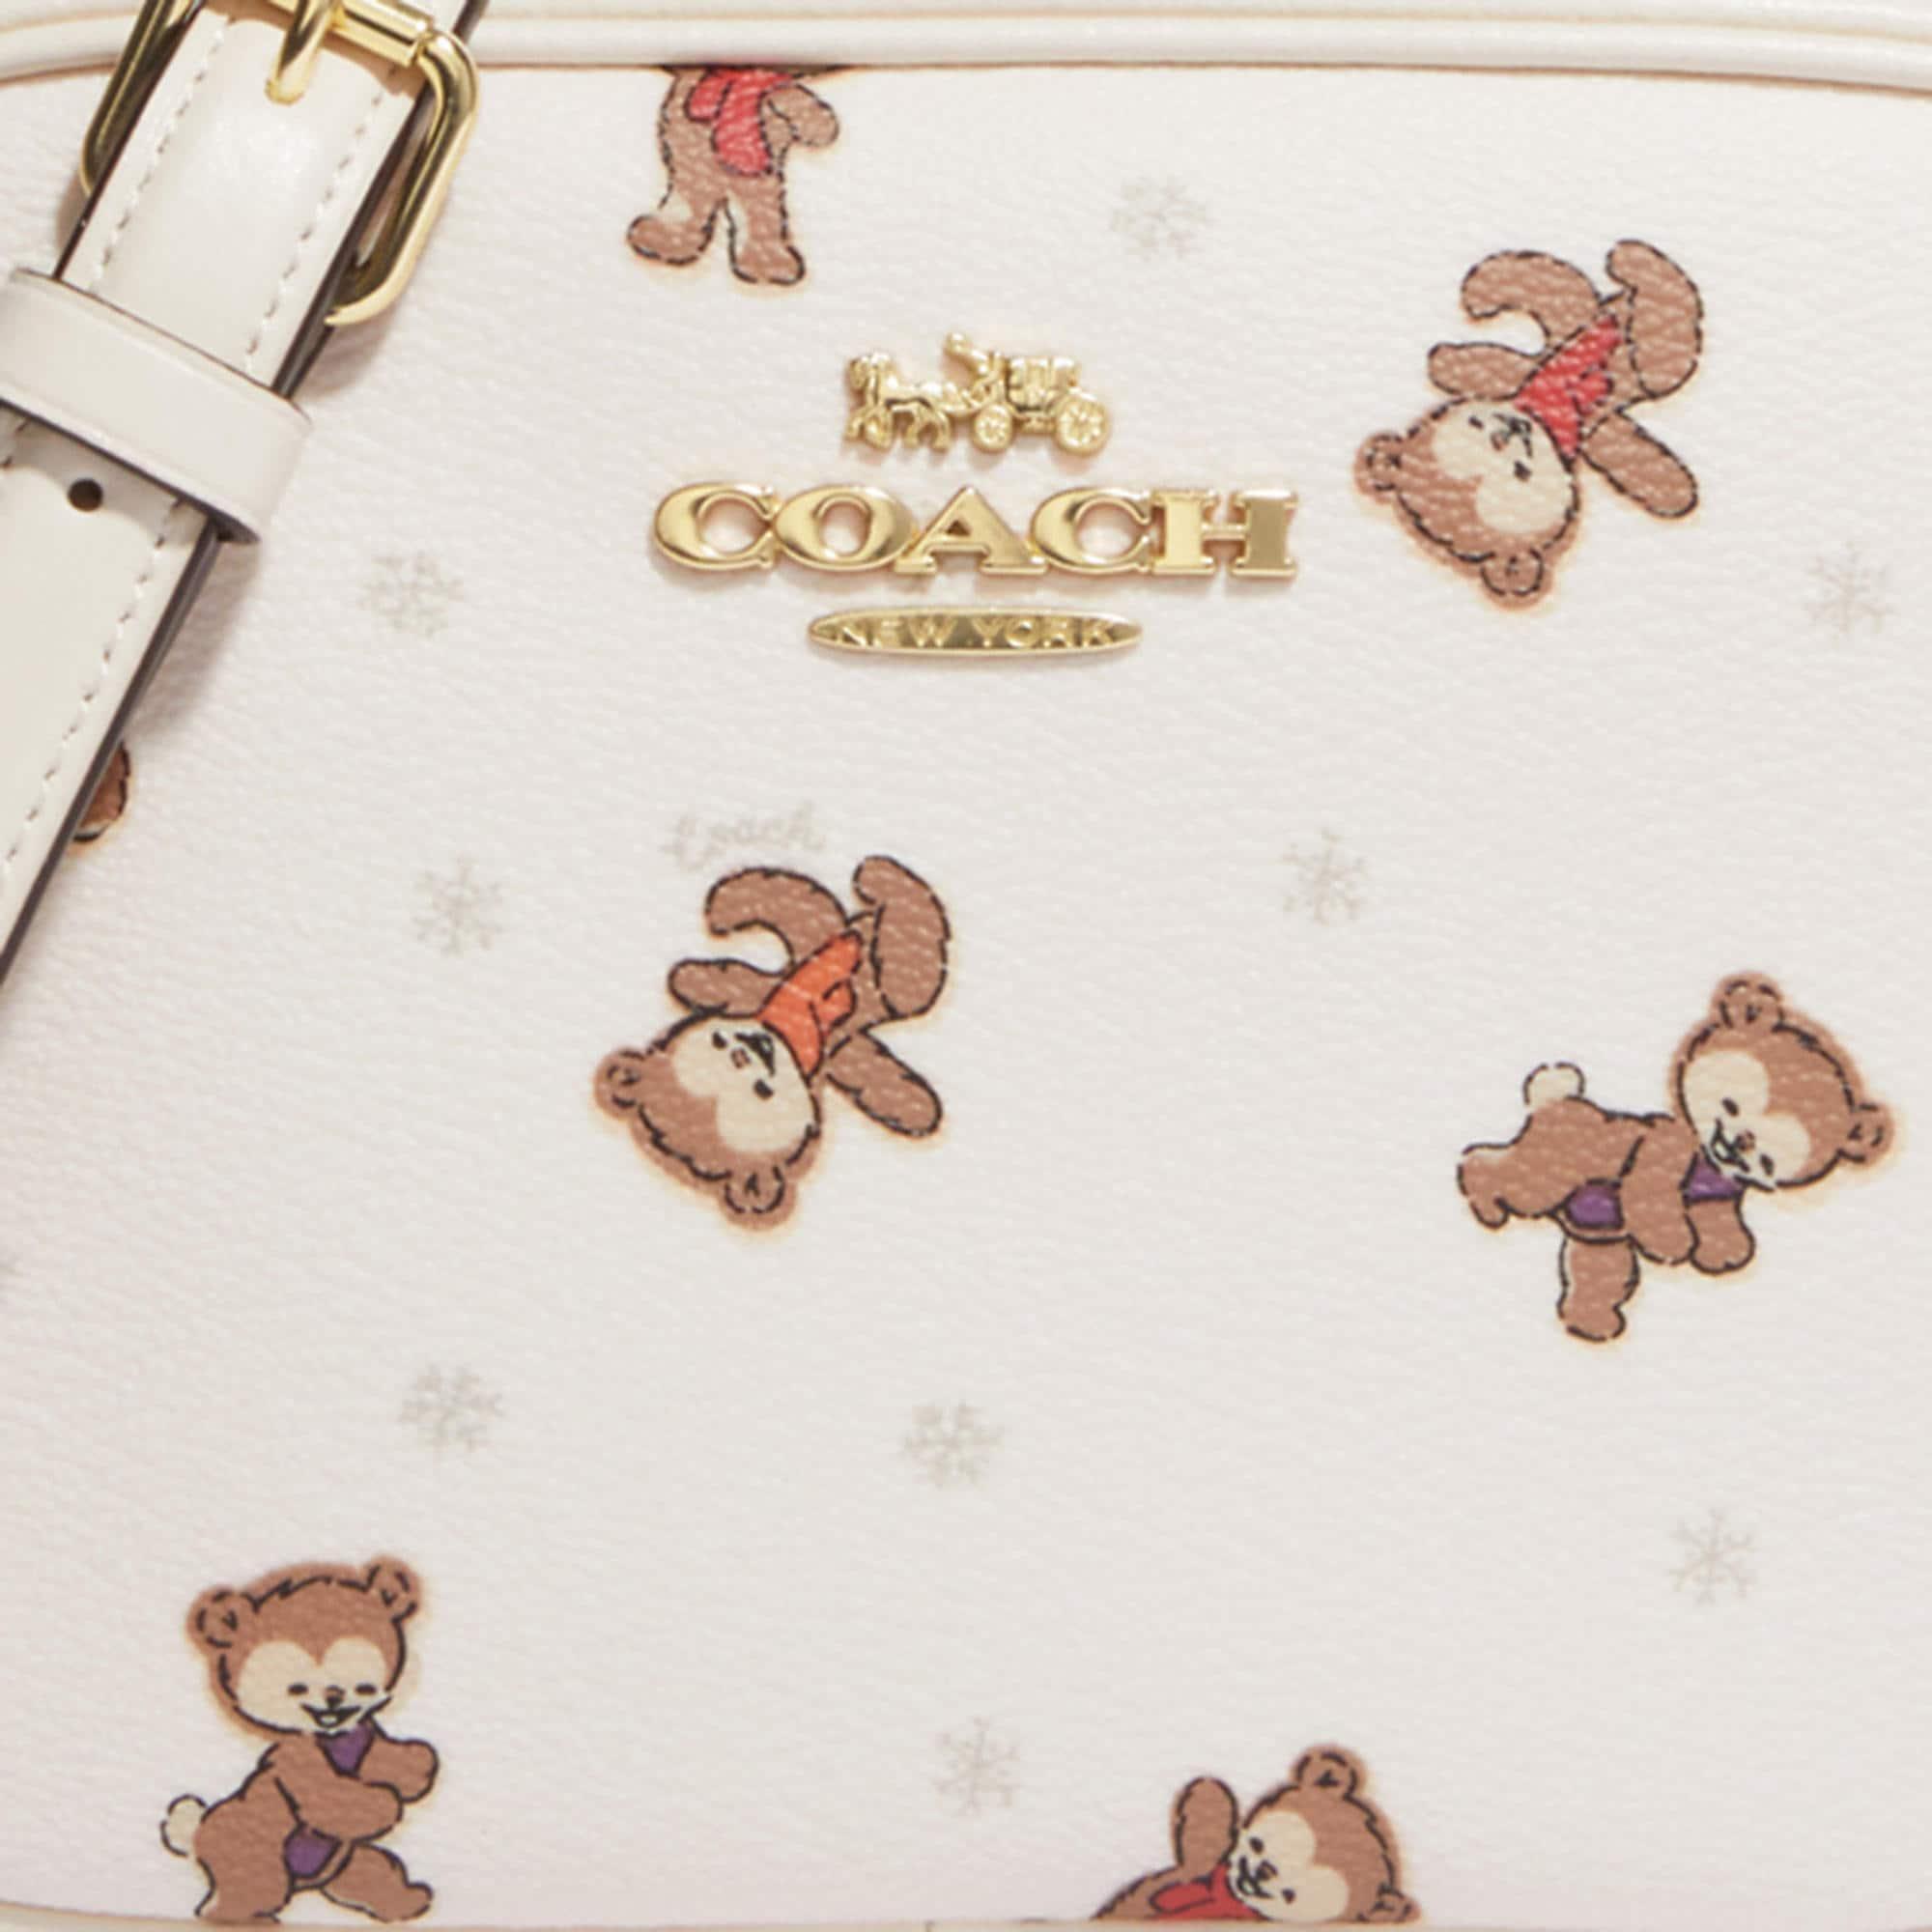 SHOP PREMIUM OUTLETS Coach Mini Skinny Id Case With Bear Snowflake Print  88.00